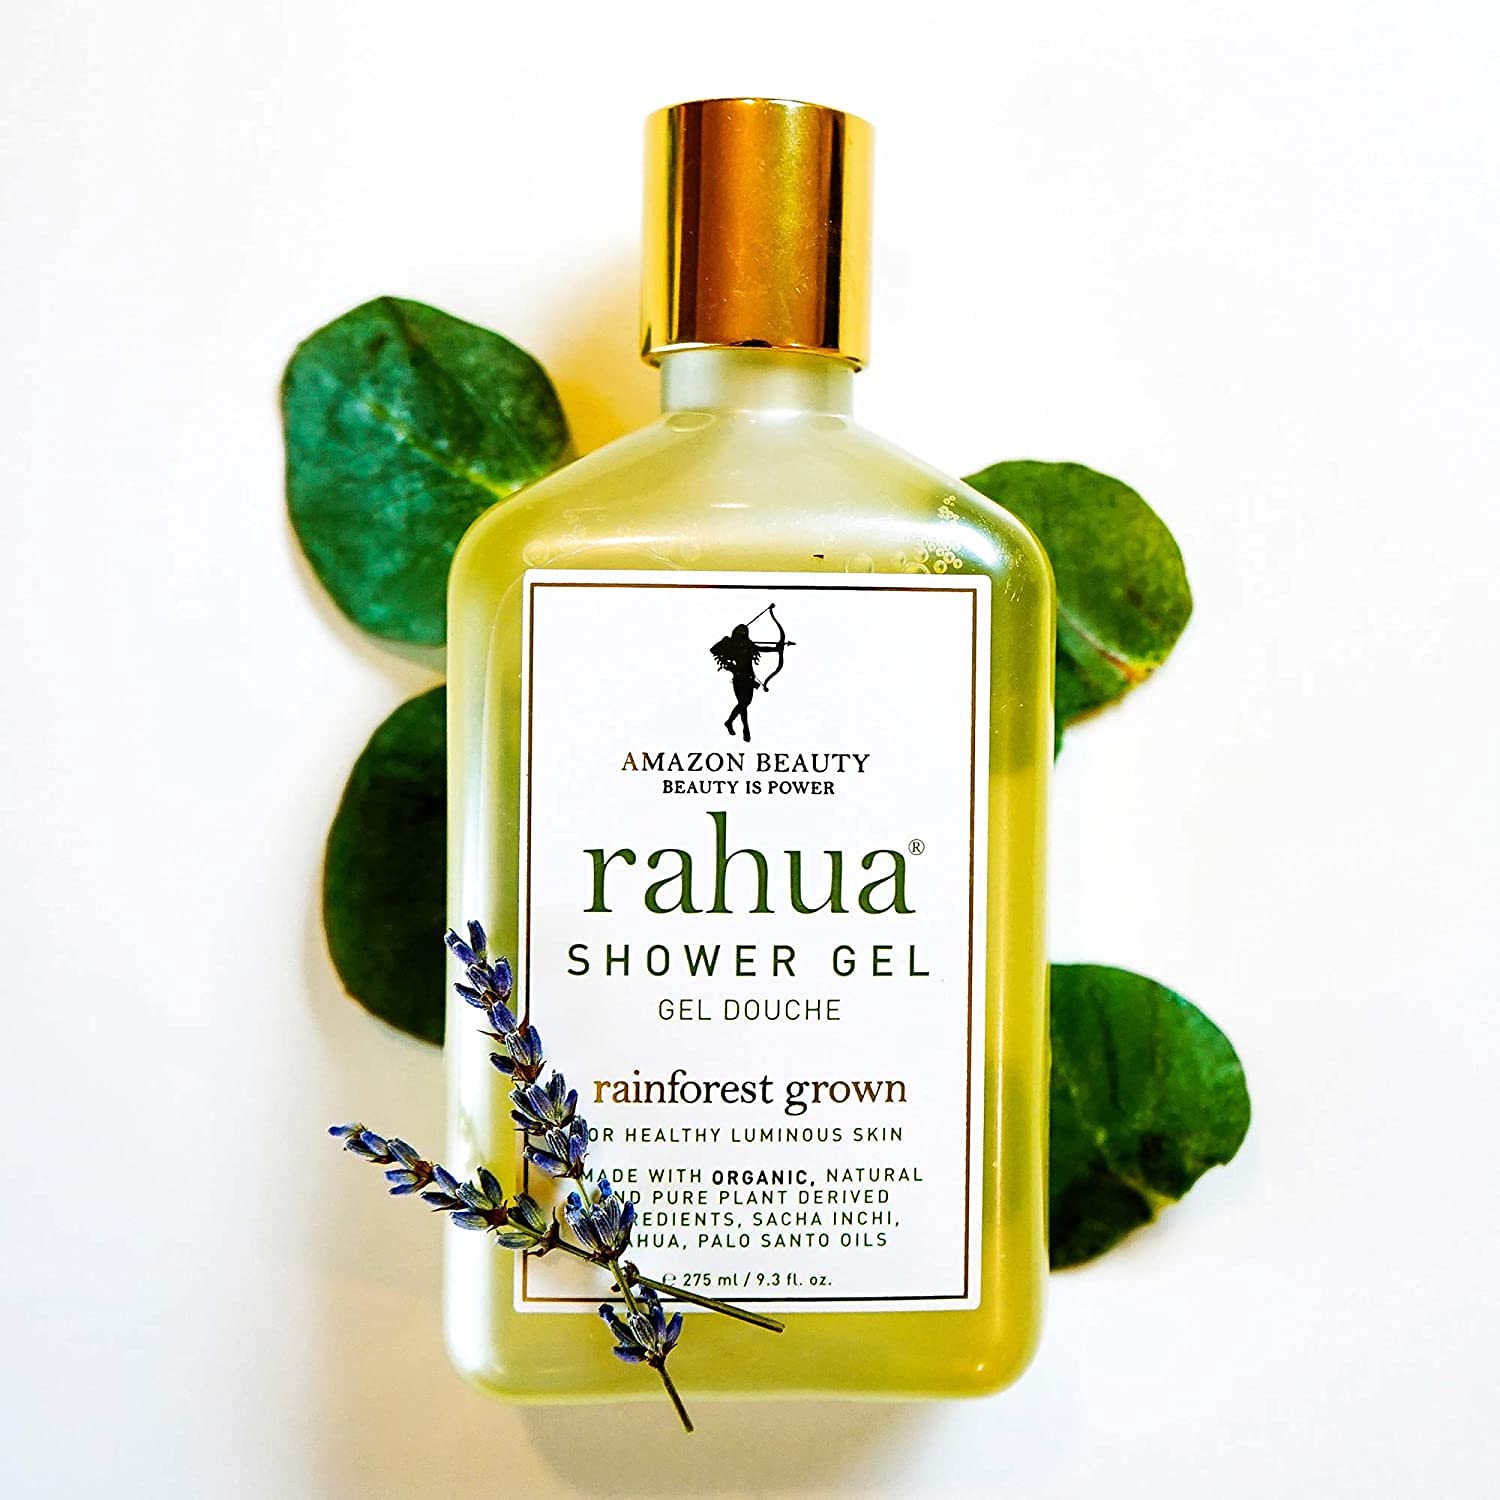 Rahua Shower Gel, 9.3 Fl Oz, Cruelty-Free, and Suitable for All Skin Types, Refreshing and Moisturizing Indulge in Luxurious Hydration.